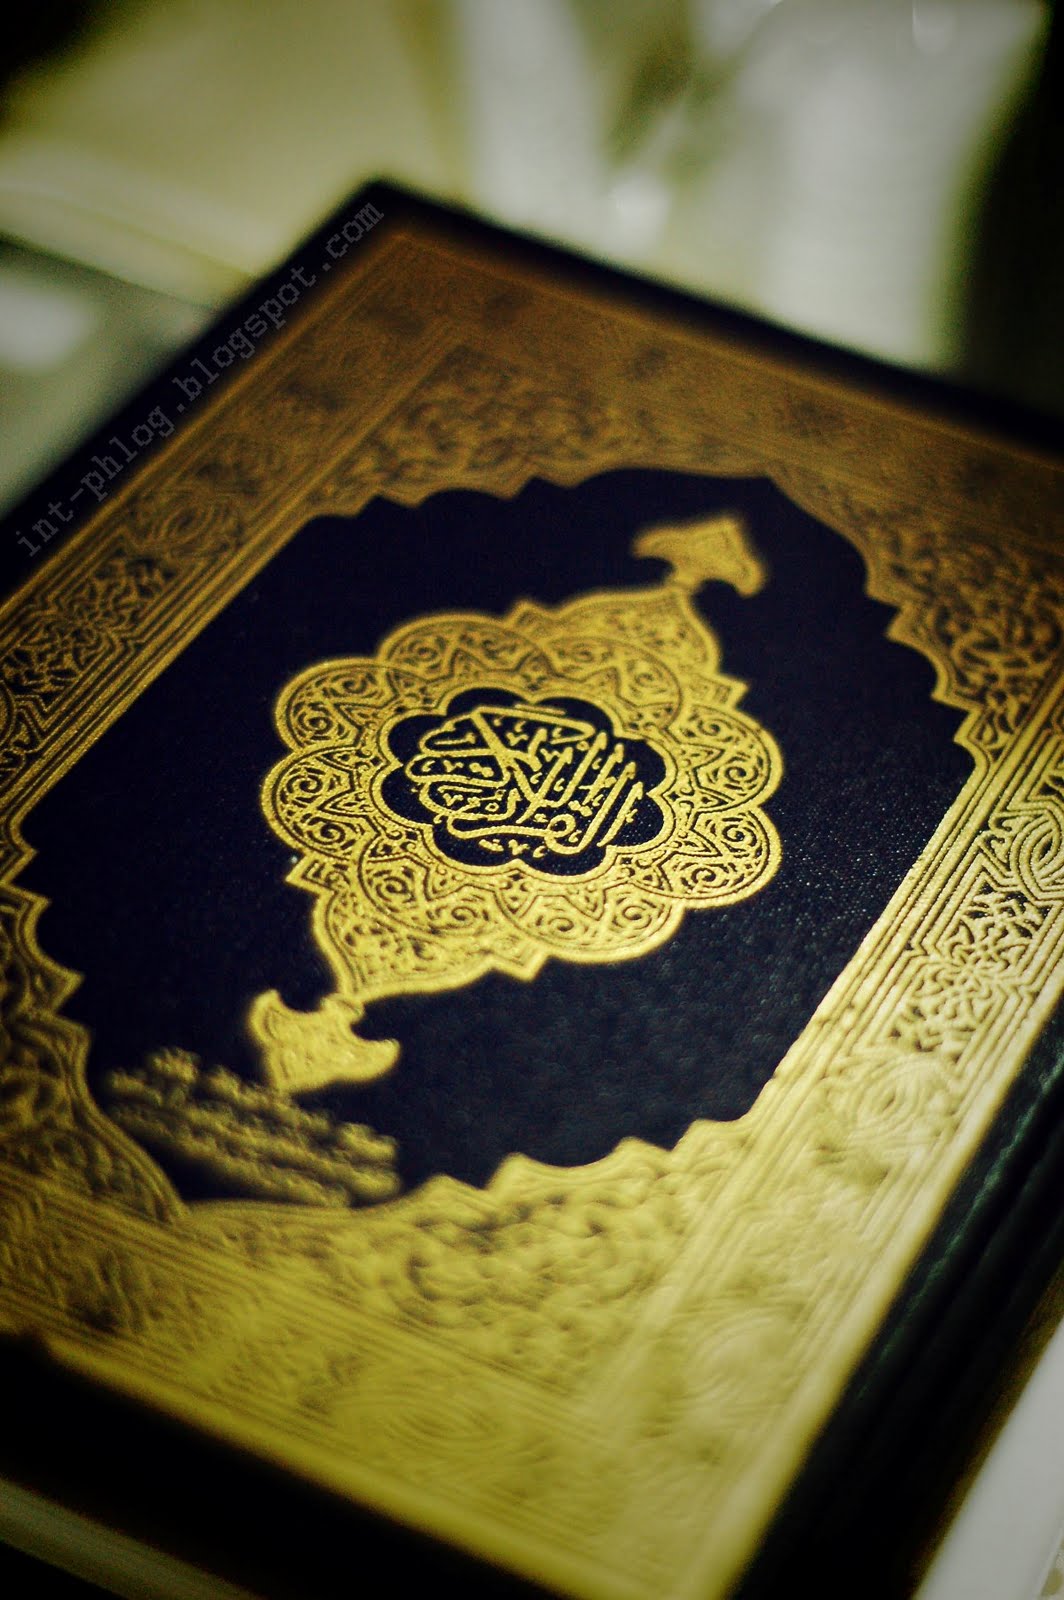 Qur’an: Matchless Perfection